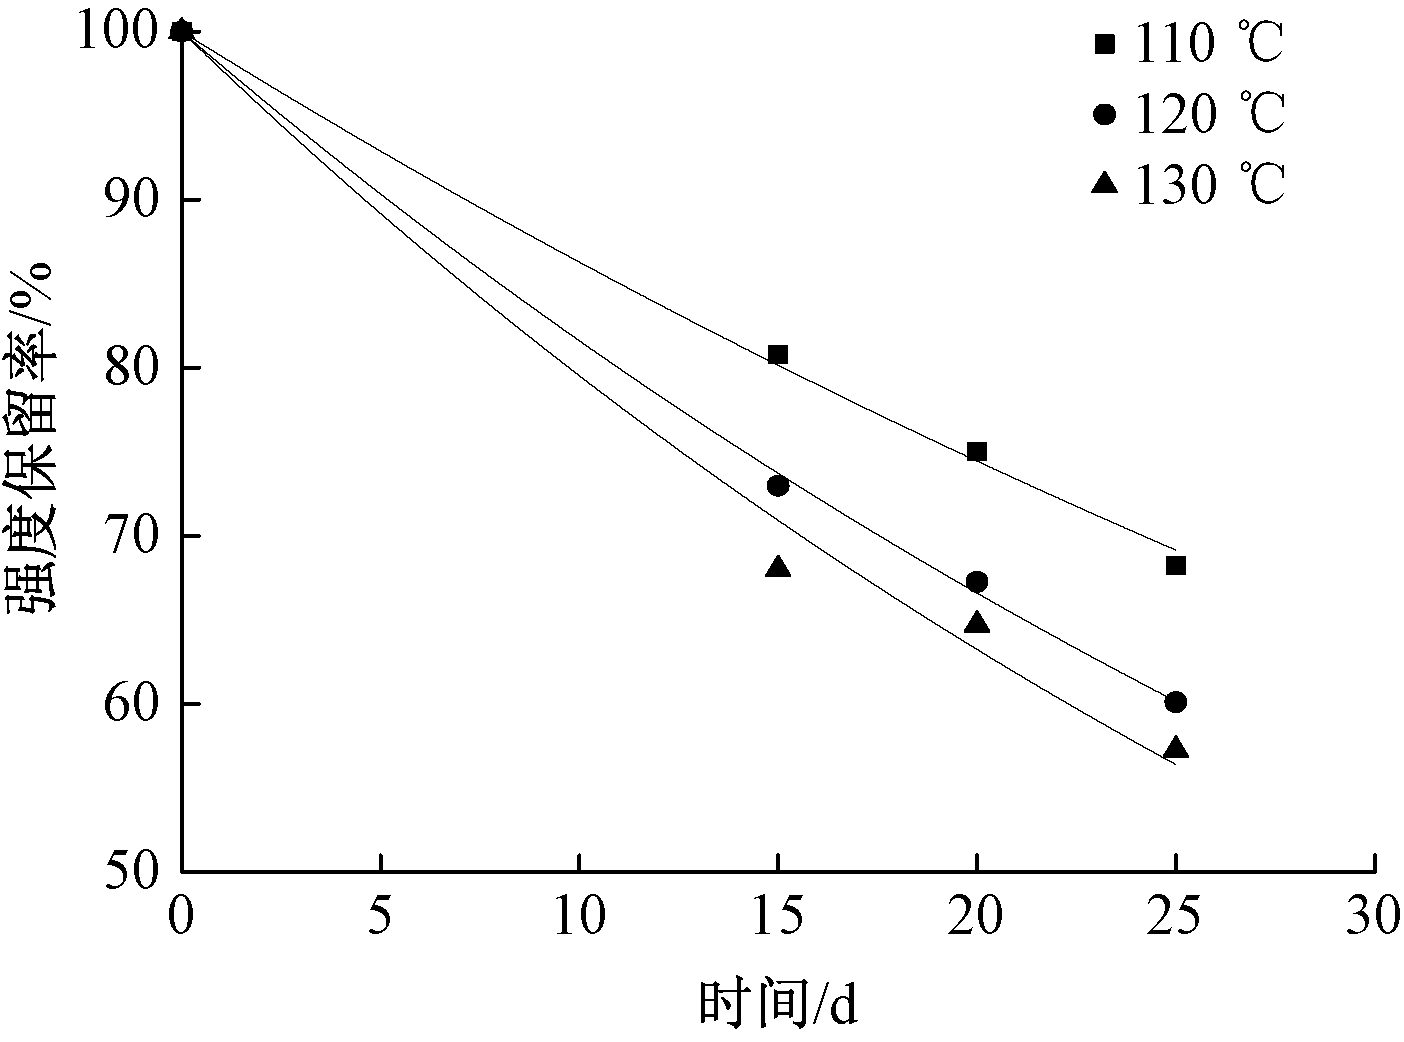 Fitting curve of thermo oxidatve aging order 1 reaction